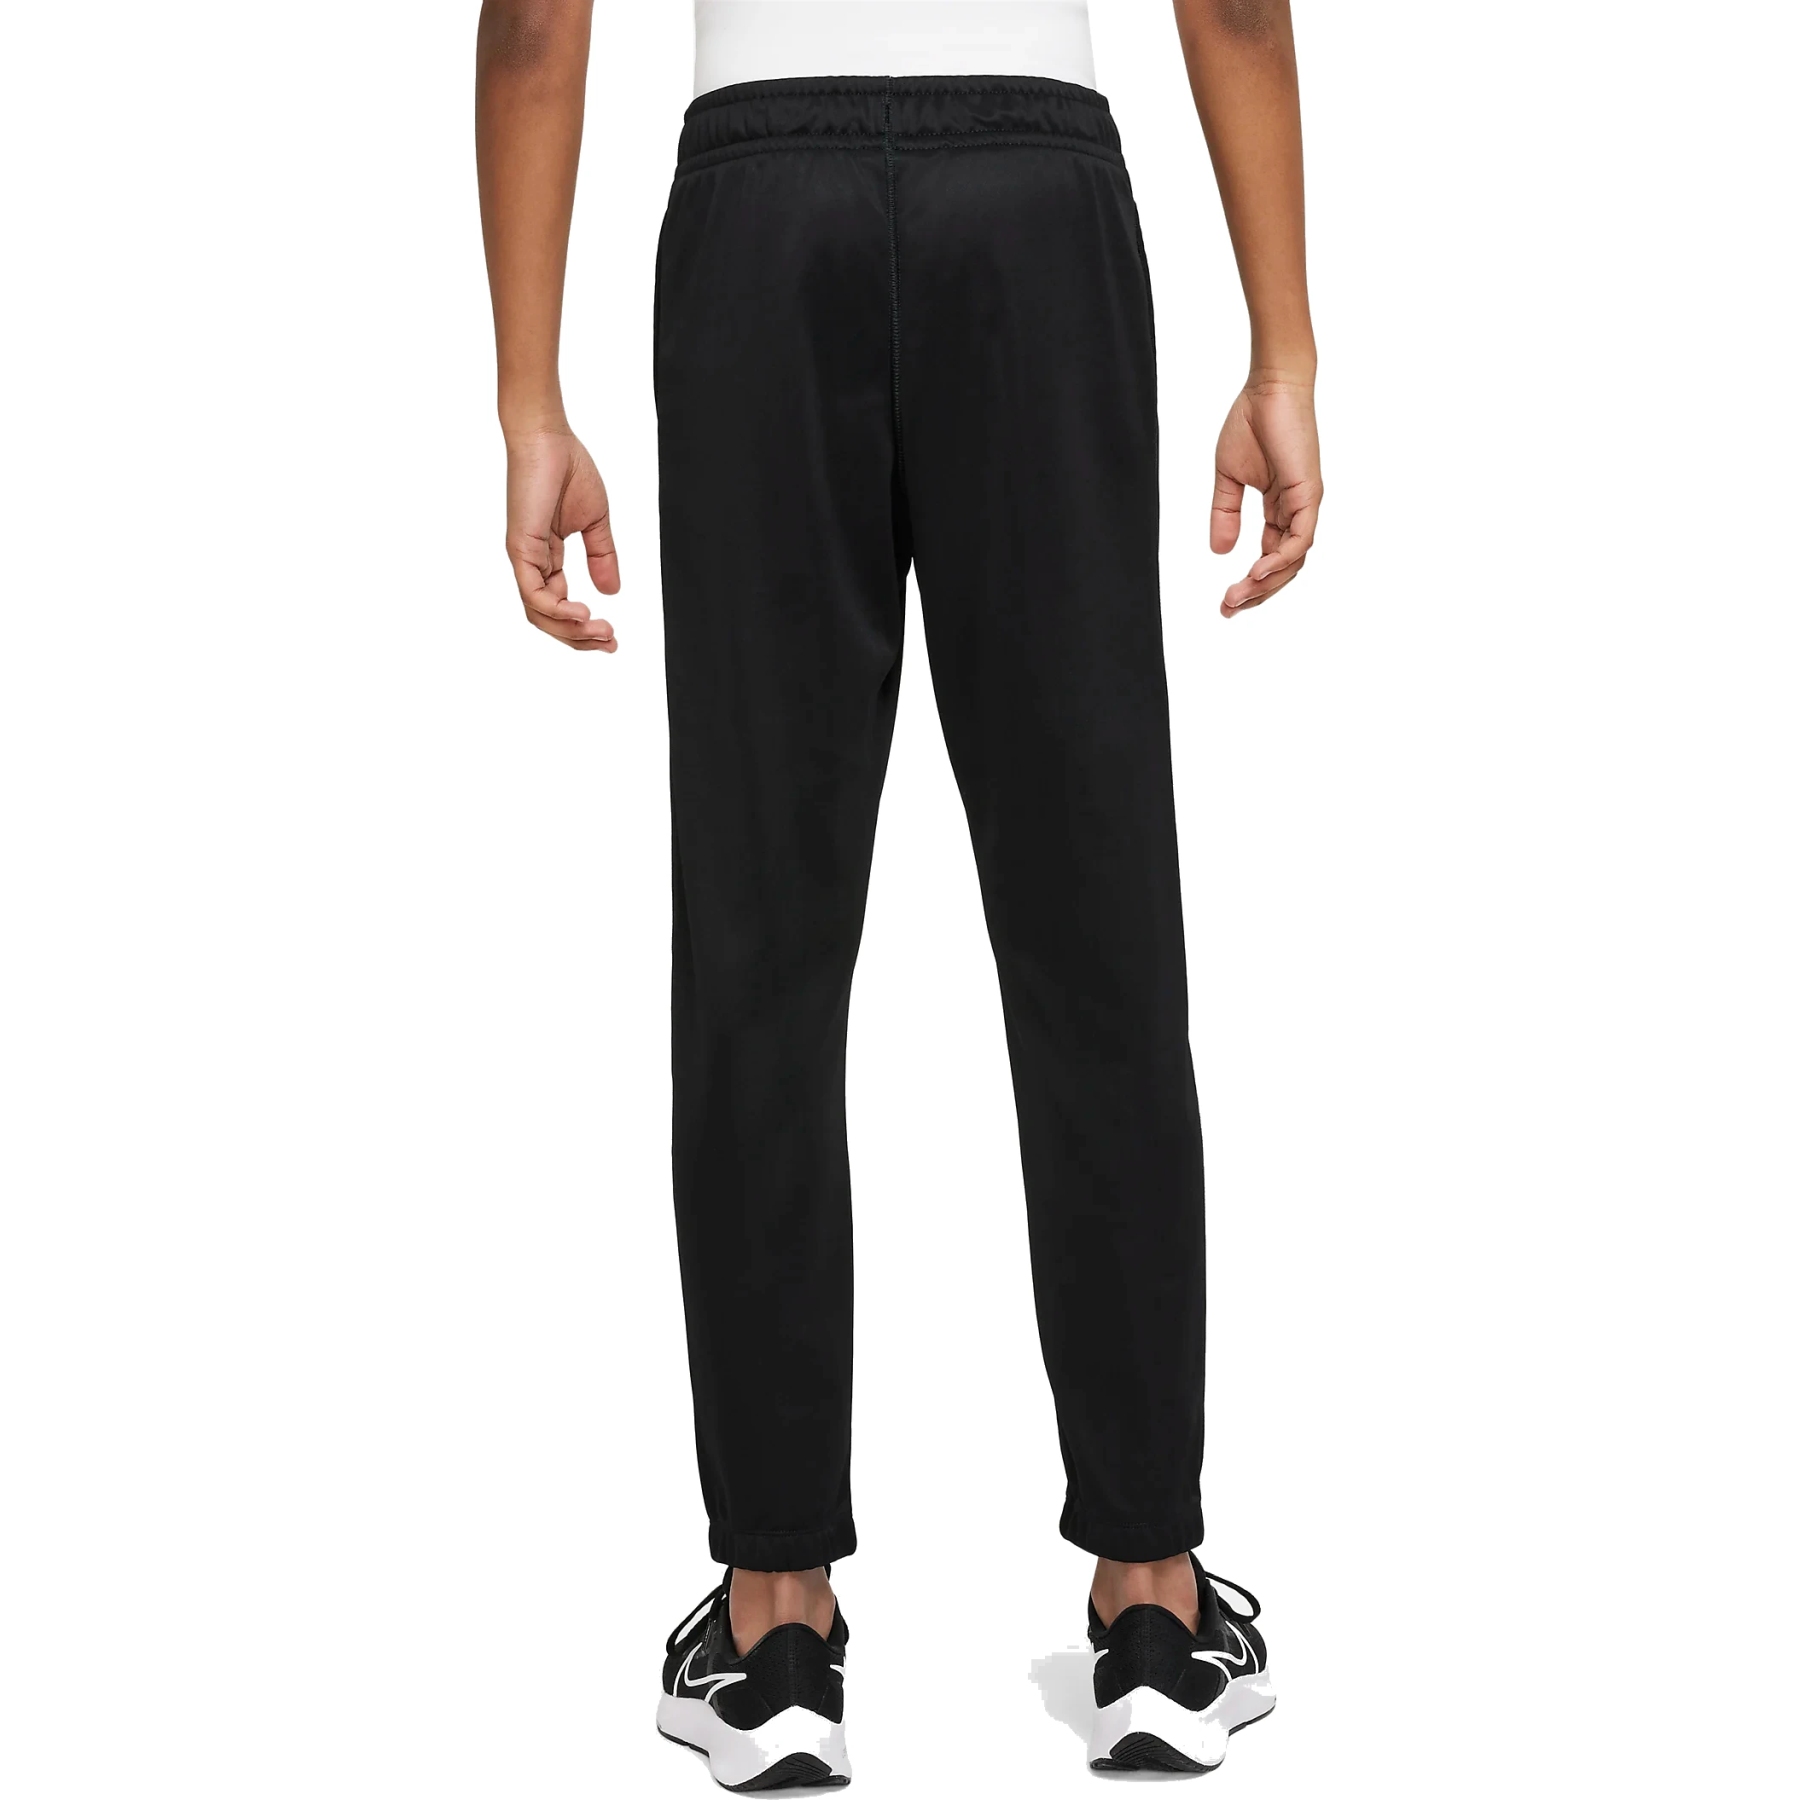 https://images.bike24.com/i/mb/96/a3/22/nike-thermo-fit-big-kids-tapered-training-pants-black-white-dq9070-010-1-1322888.jpg